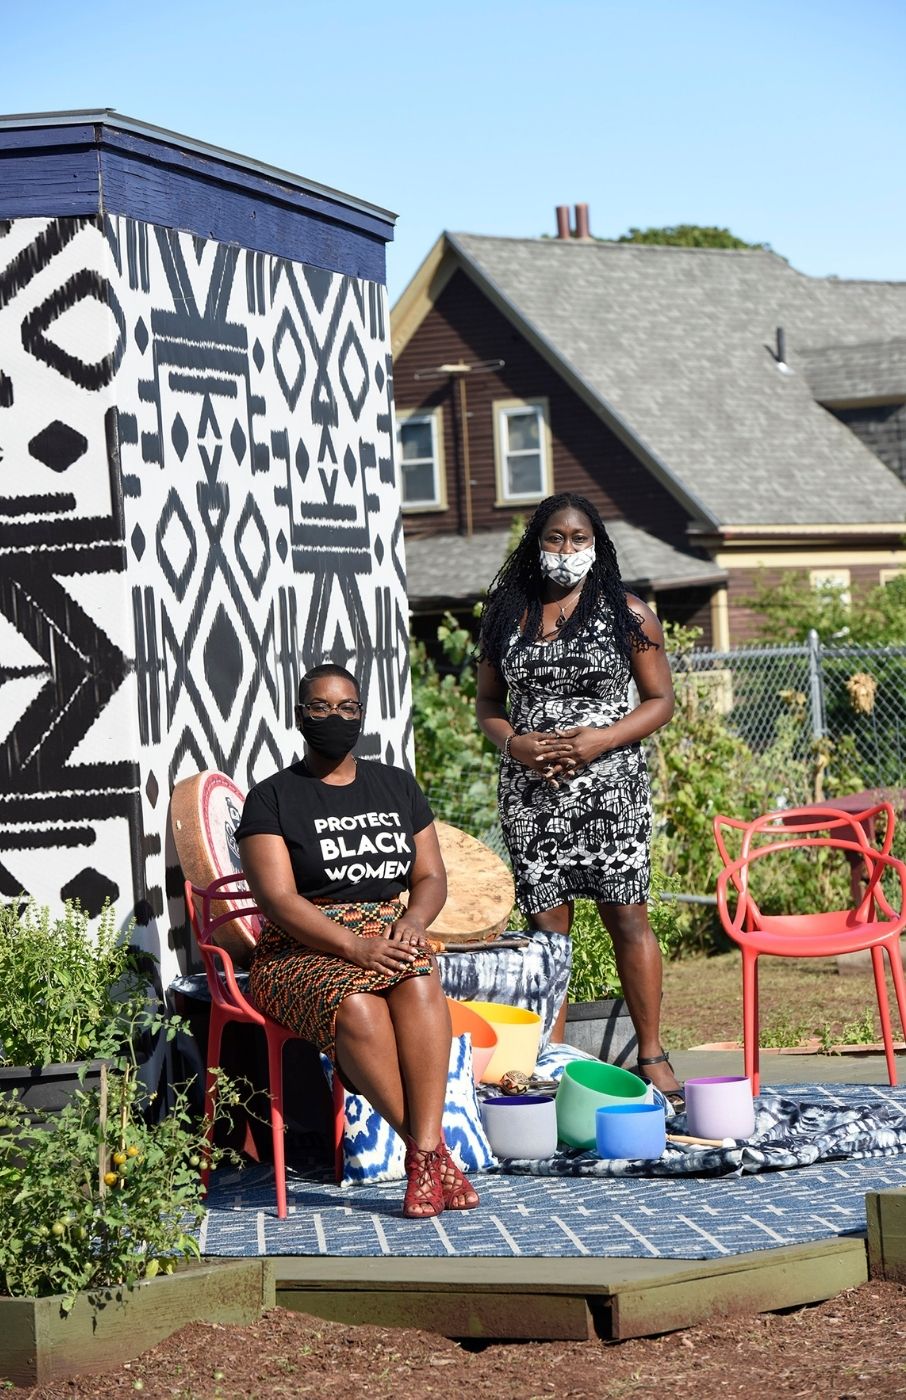 Jennifer Mompoint and Jhana Senxian at The Guild. Jennifer is sitting in an organe metal chair to the left of Jhana, who is standing. Both are on a blue and white patterned wooden platform. Between them are buckets of paint, each one color from the rainbow. Behind them and to the left is a cube structure adorned with a black and white pattern. In the background are bushes, a dirt covered ground, a brown house and blue sky.